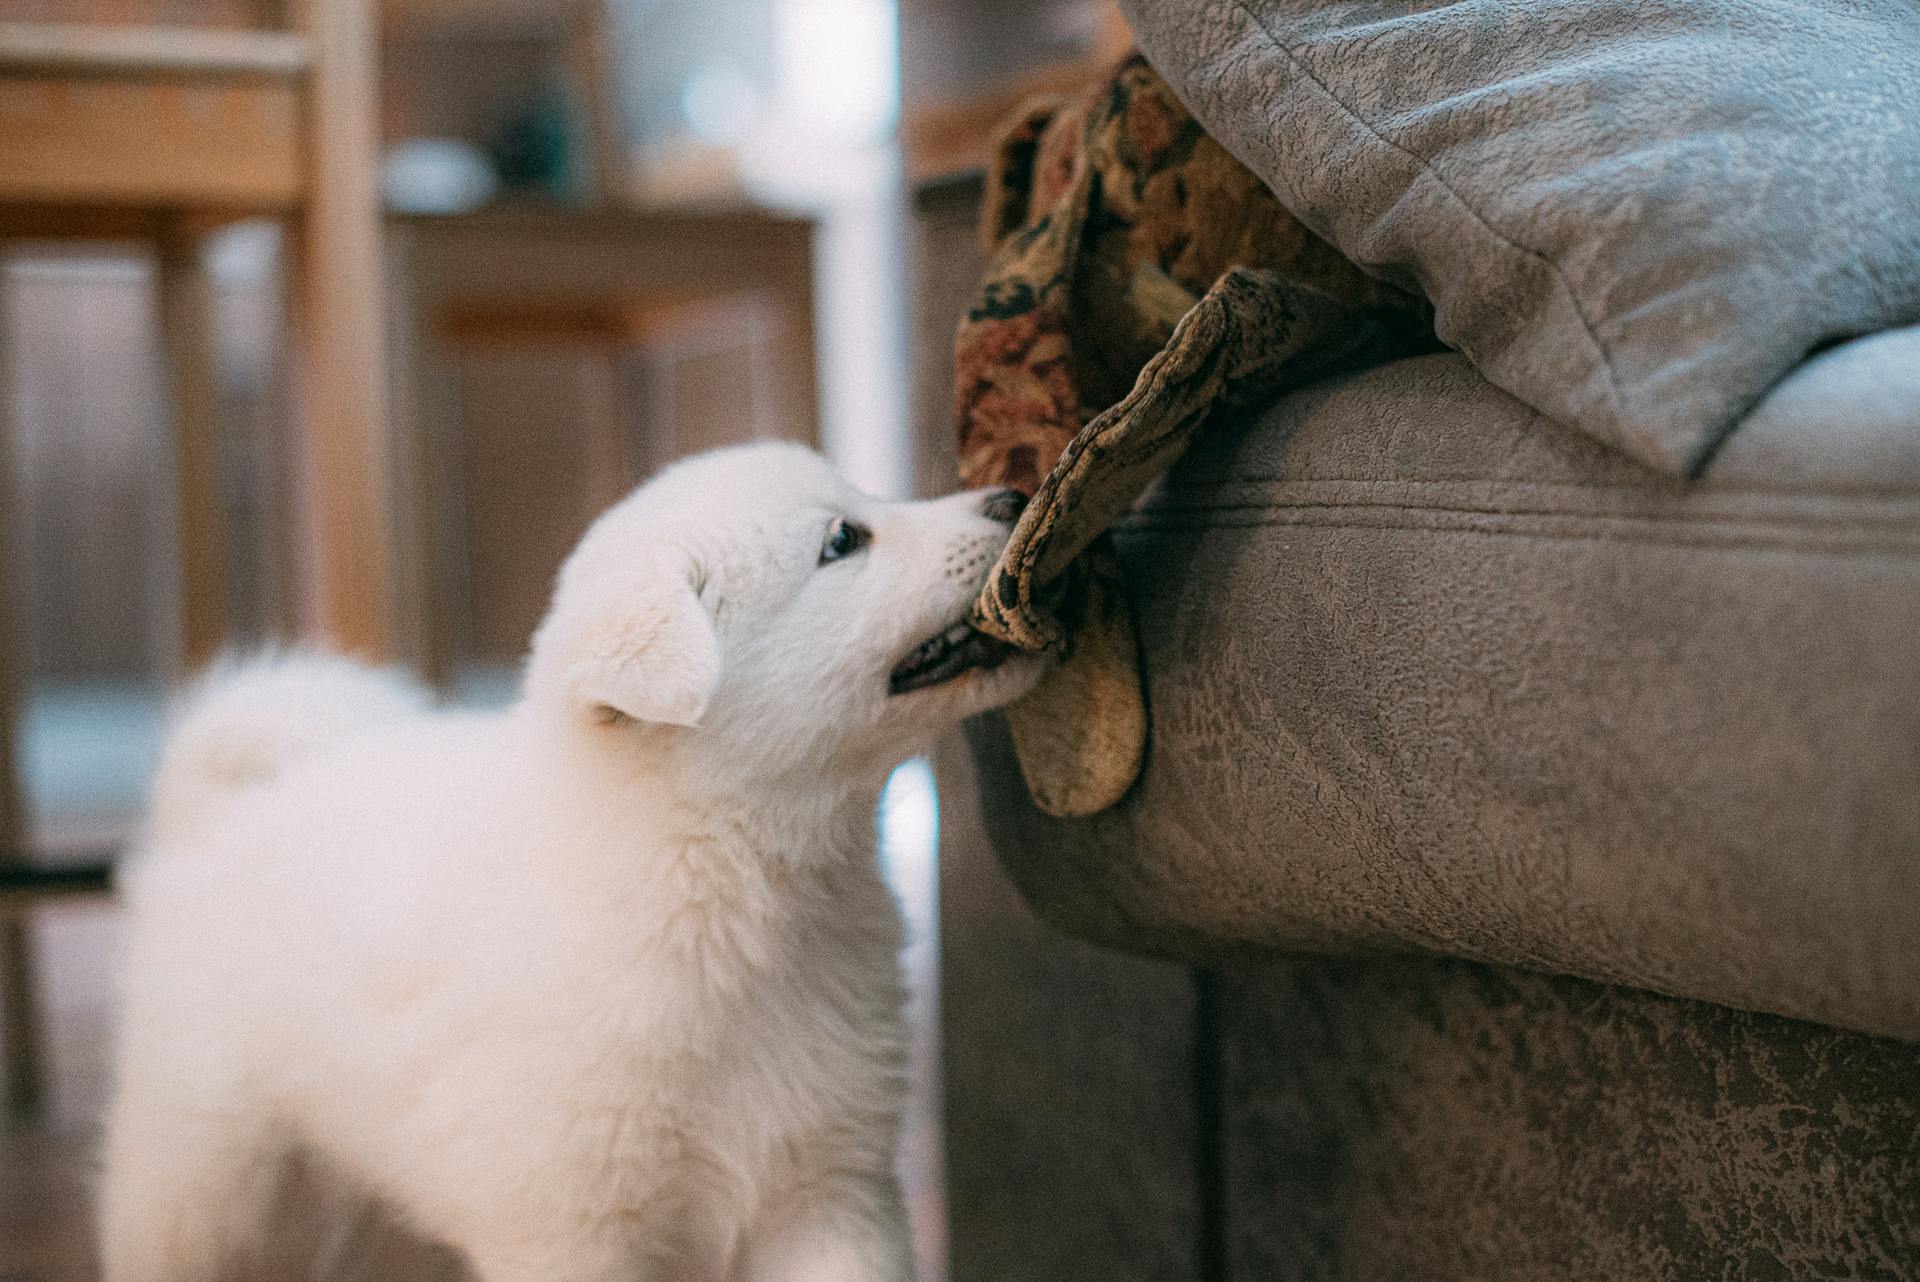 A white puppy biting the corner of a sofa pillow